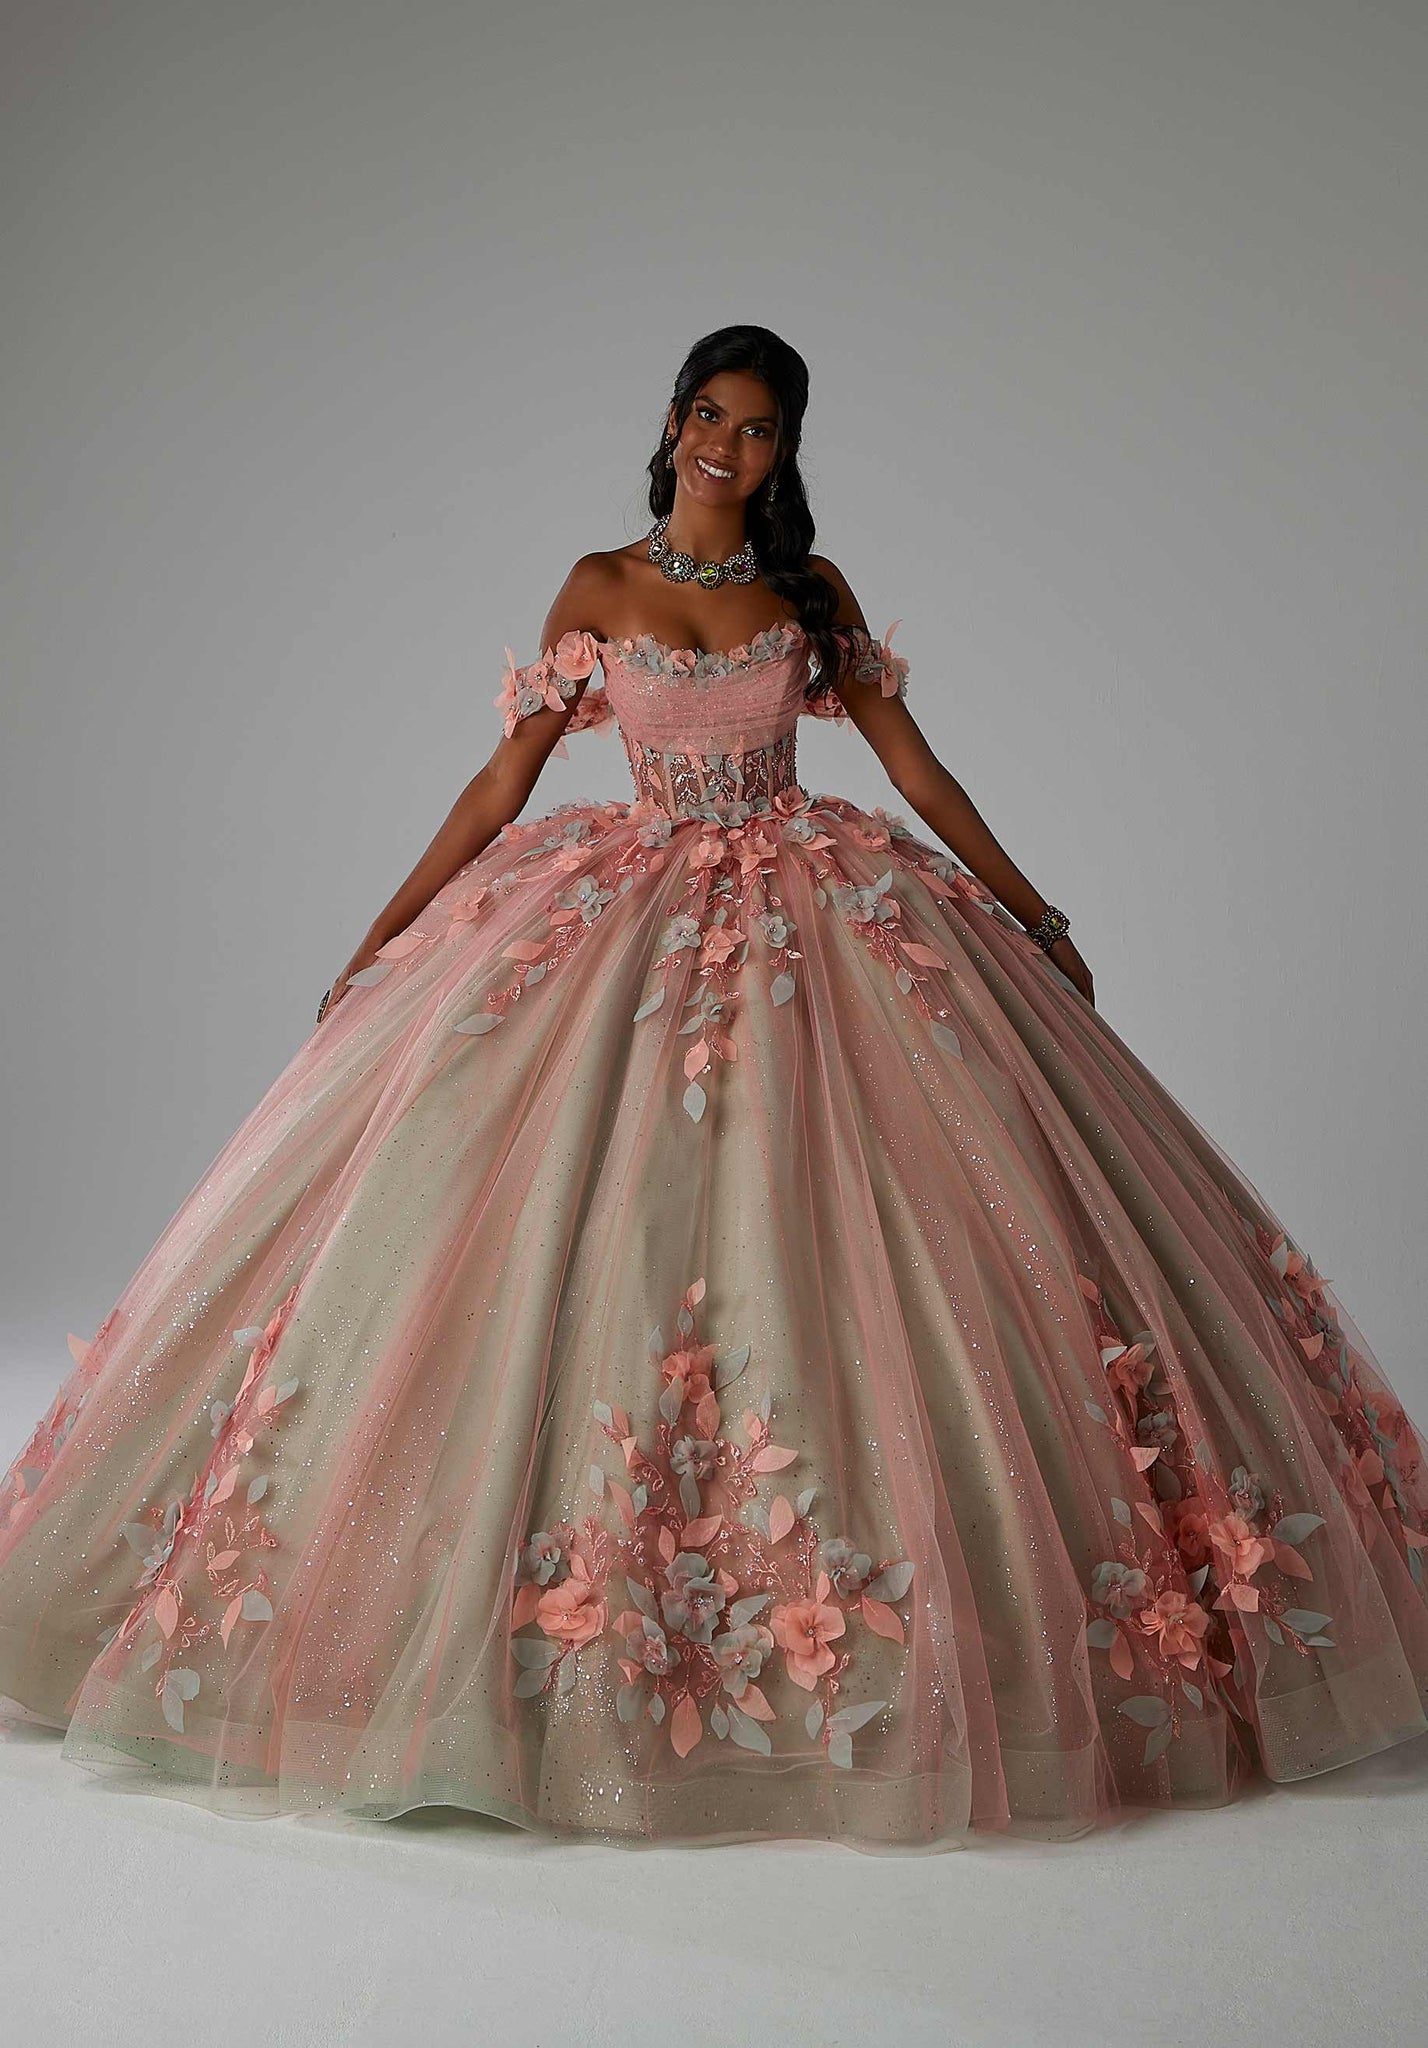 Sheer Bodice Quinceañera Dress with Three-Dimensional Floral Embroidery